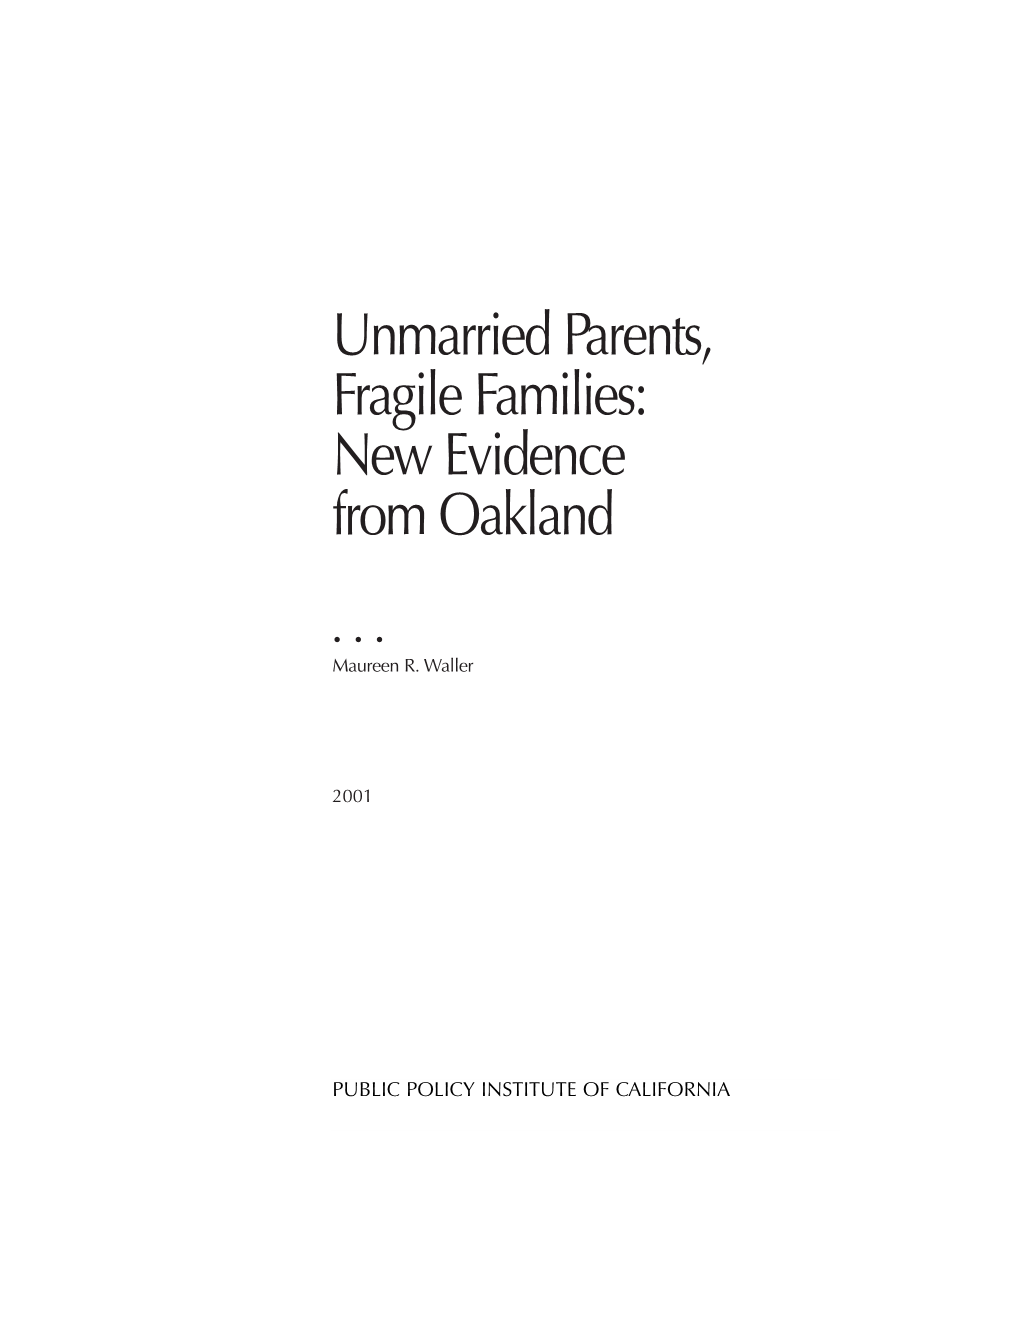 Unmarried Parents, Fragile Families: New Evidence from Oakland